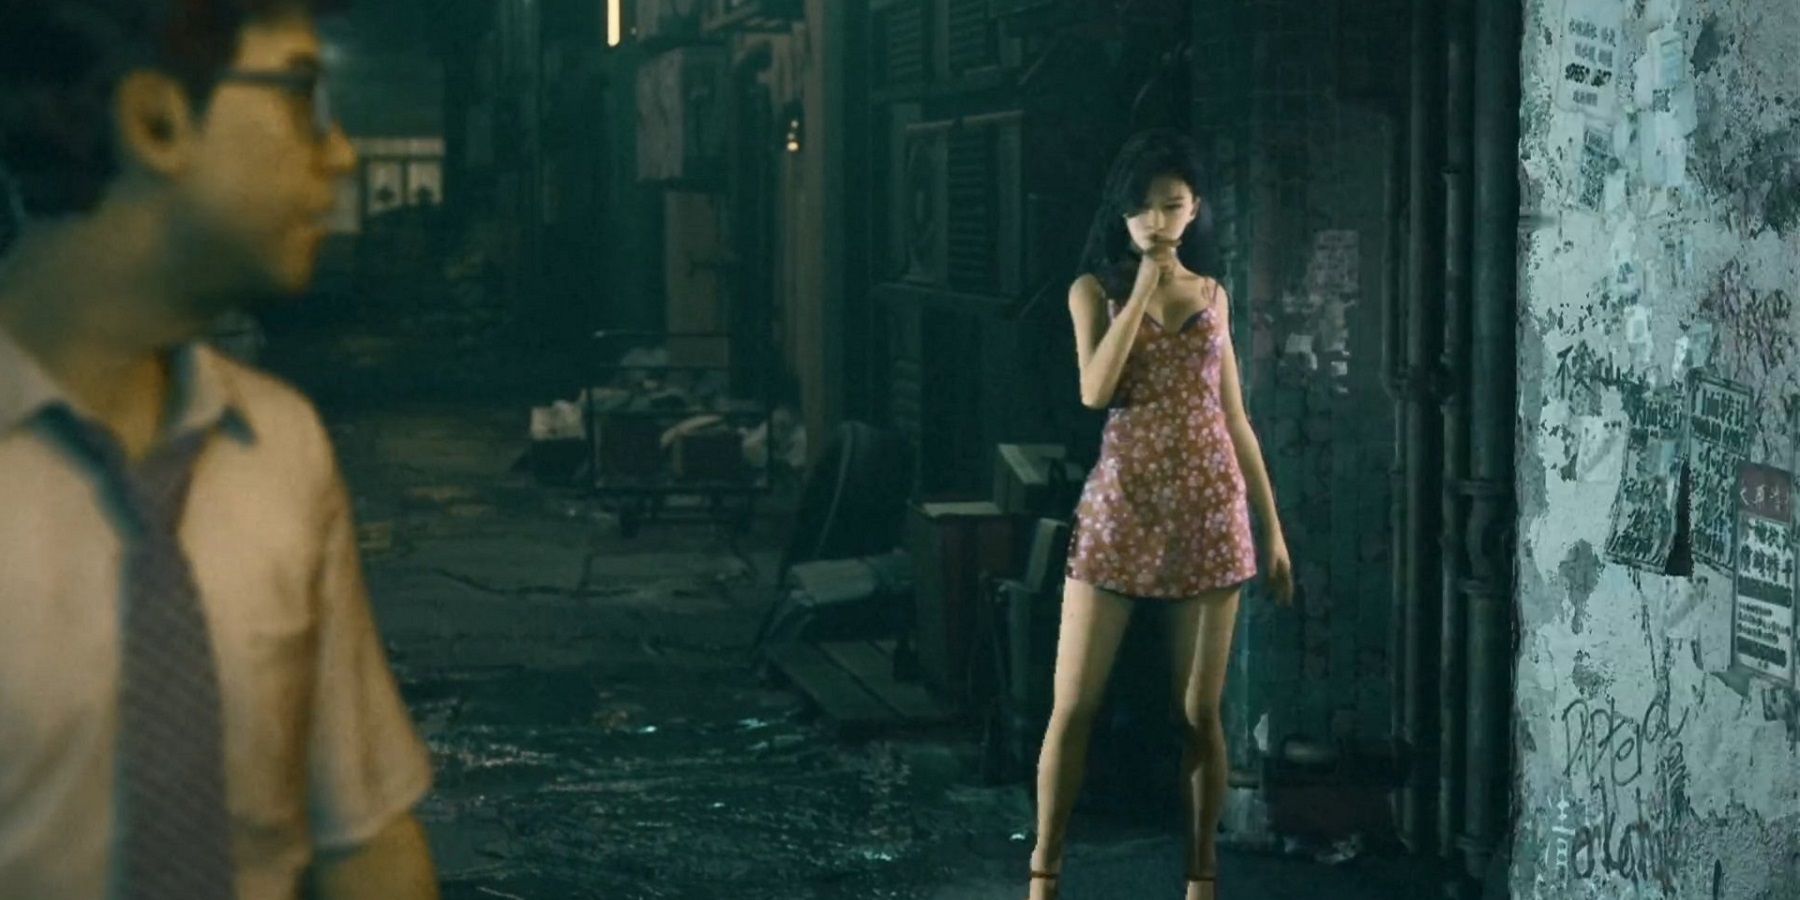 Image from Slitterhead trailer showing a woman in a short dress approaching a man in a shirt and tie.